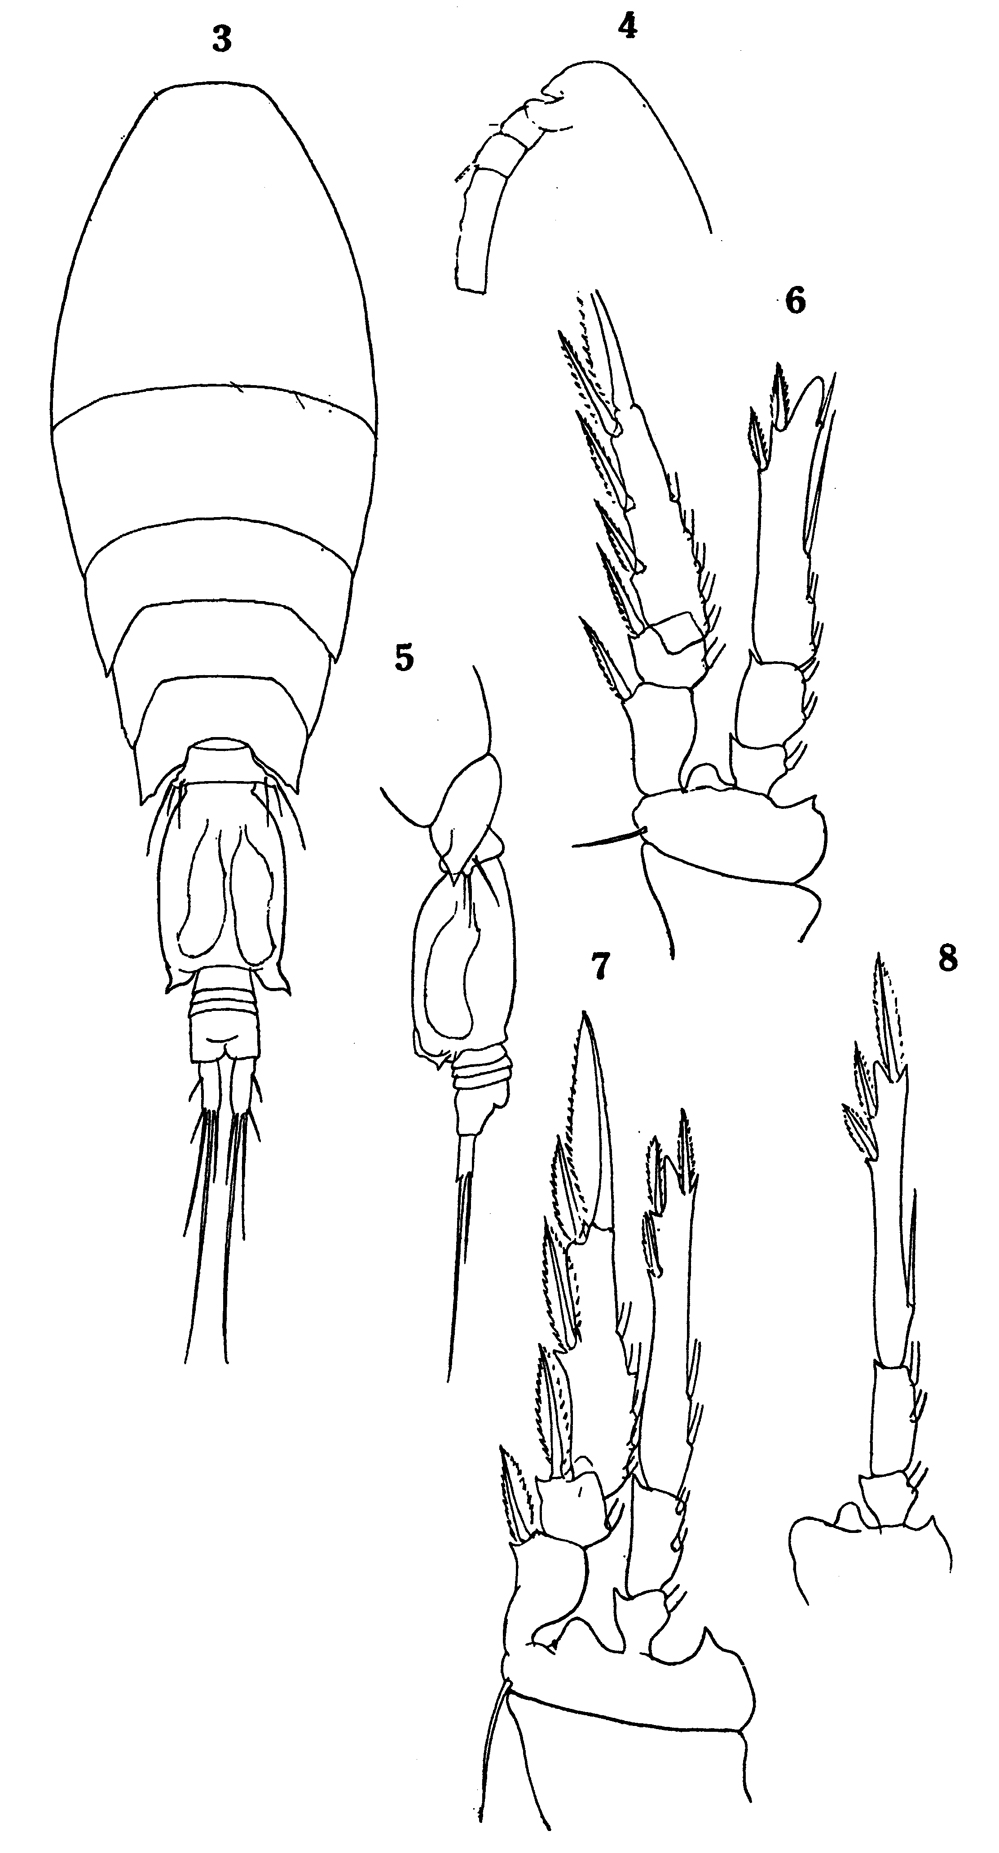 Species Triconia antarctica - Plate 7 of morphological figures